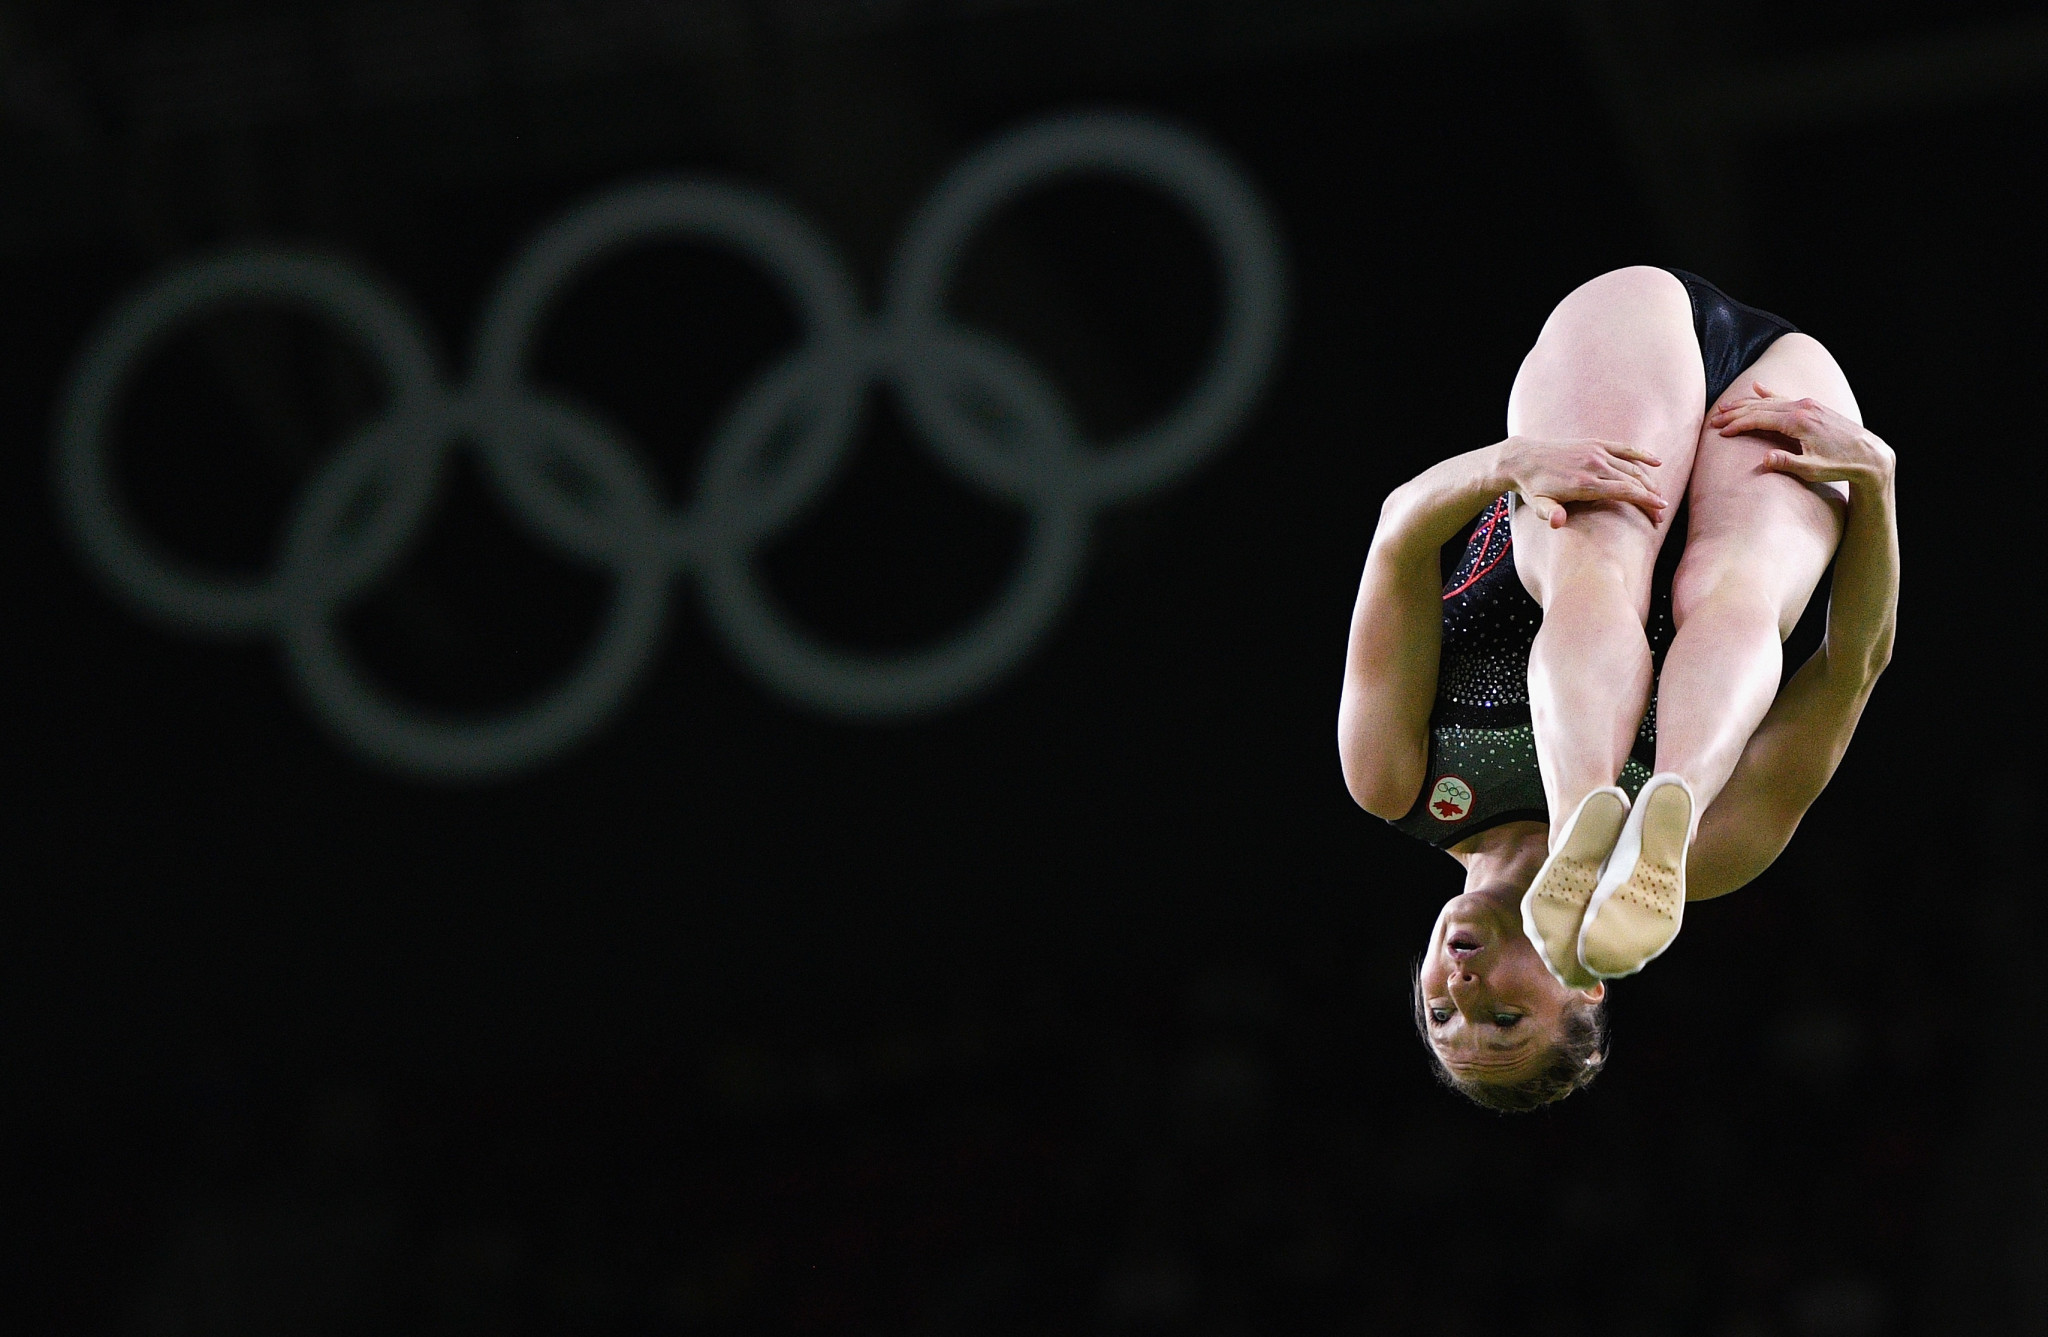 Canada's Rosie MacLennan won the women's trampoline gold medal at the Rio 2016 Olympic Games ©Getty Images